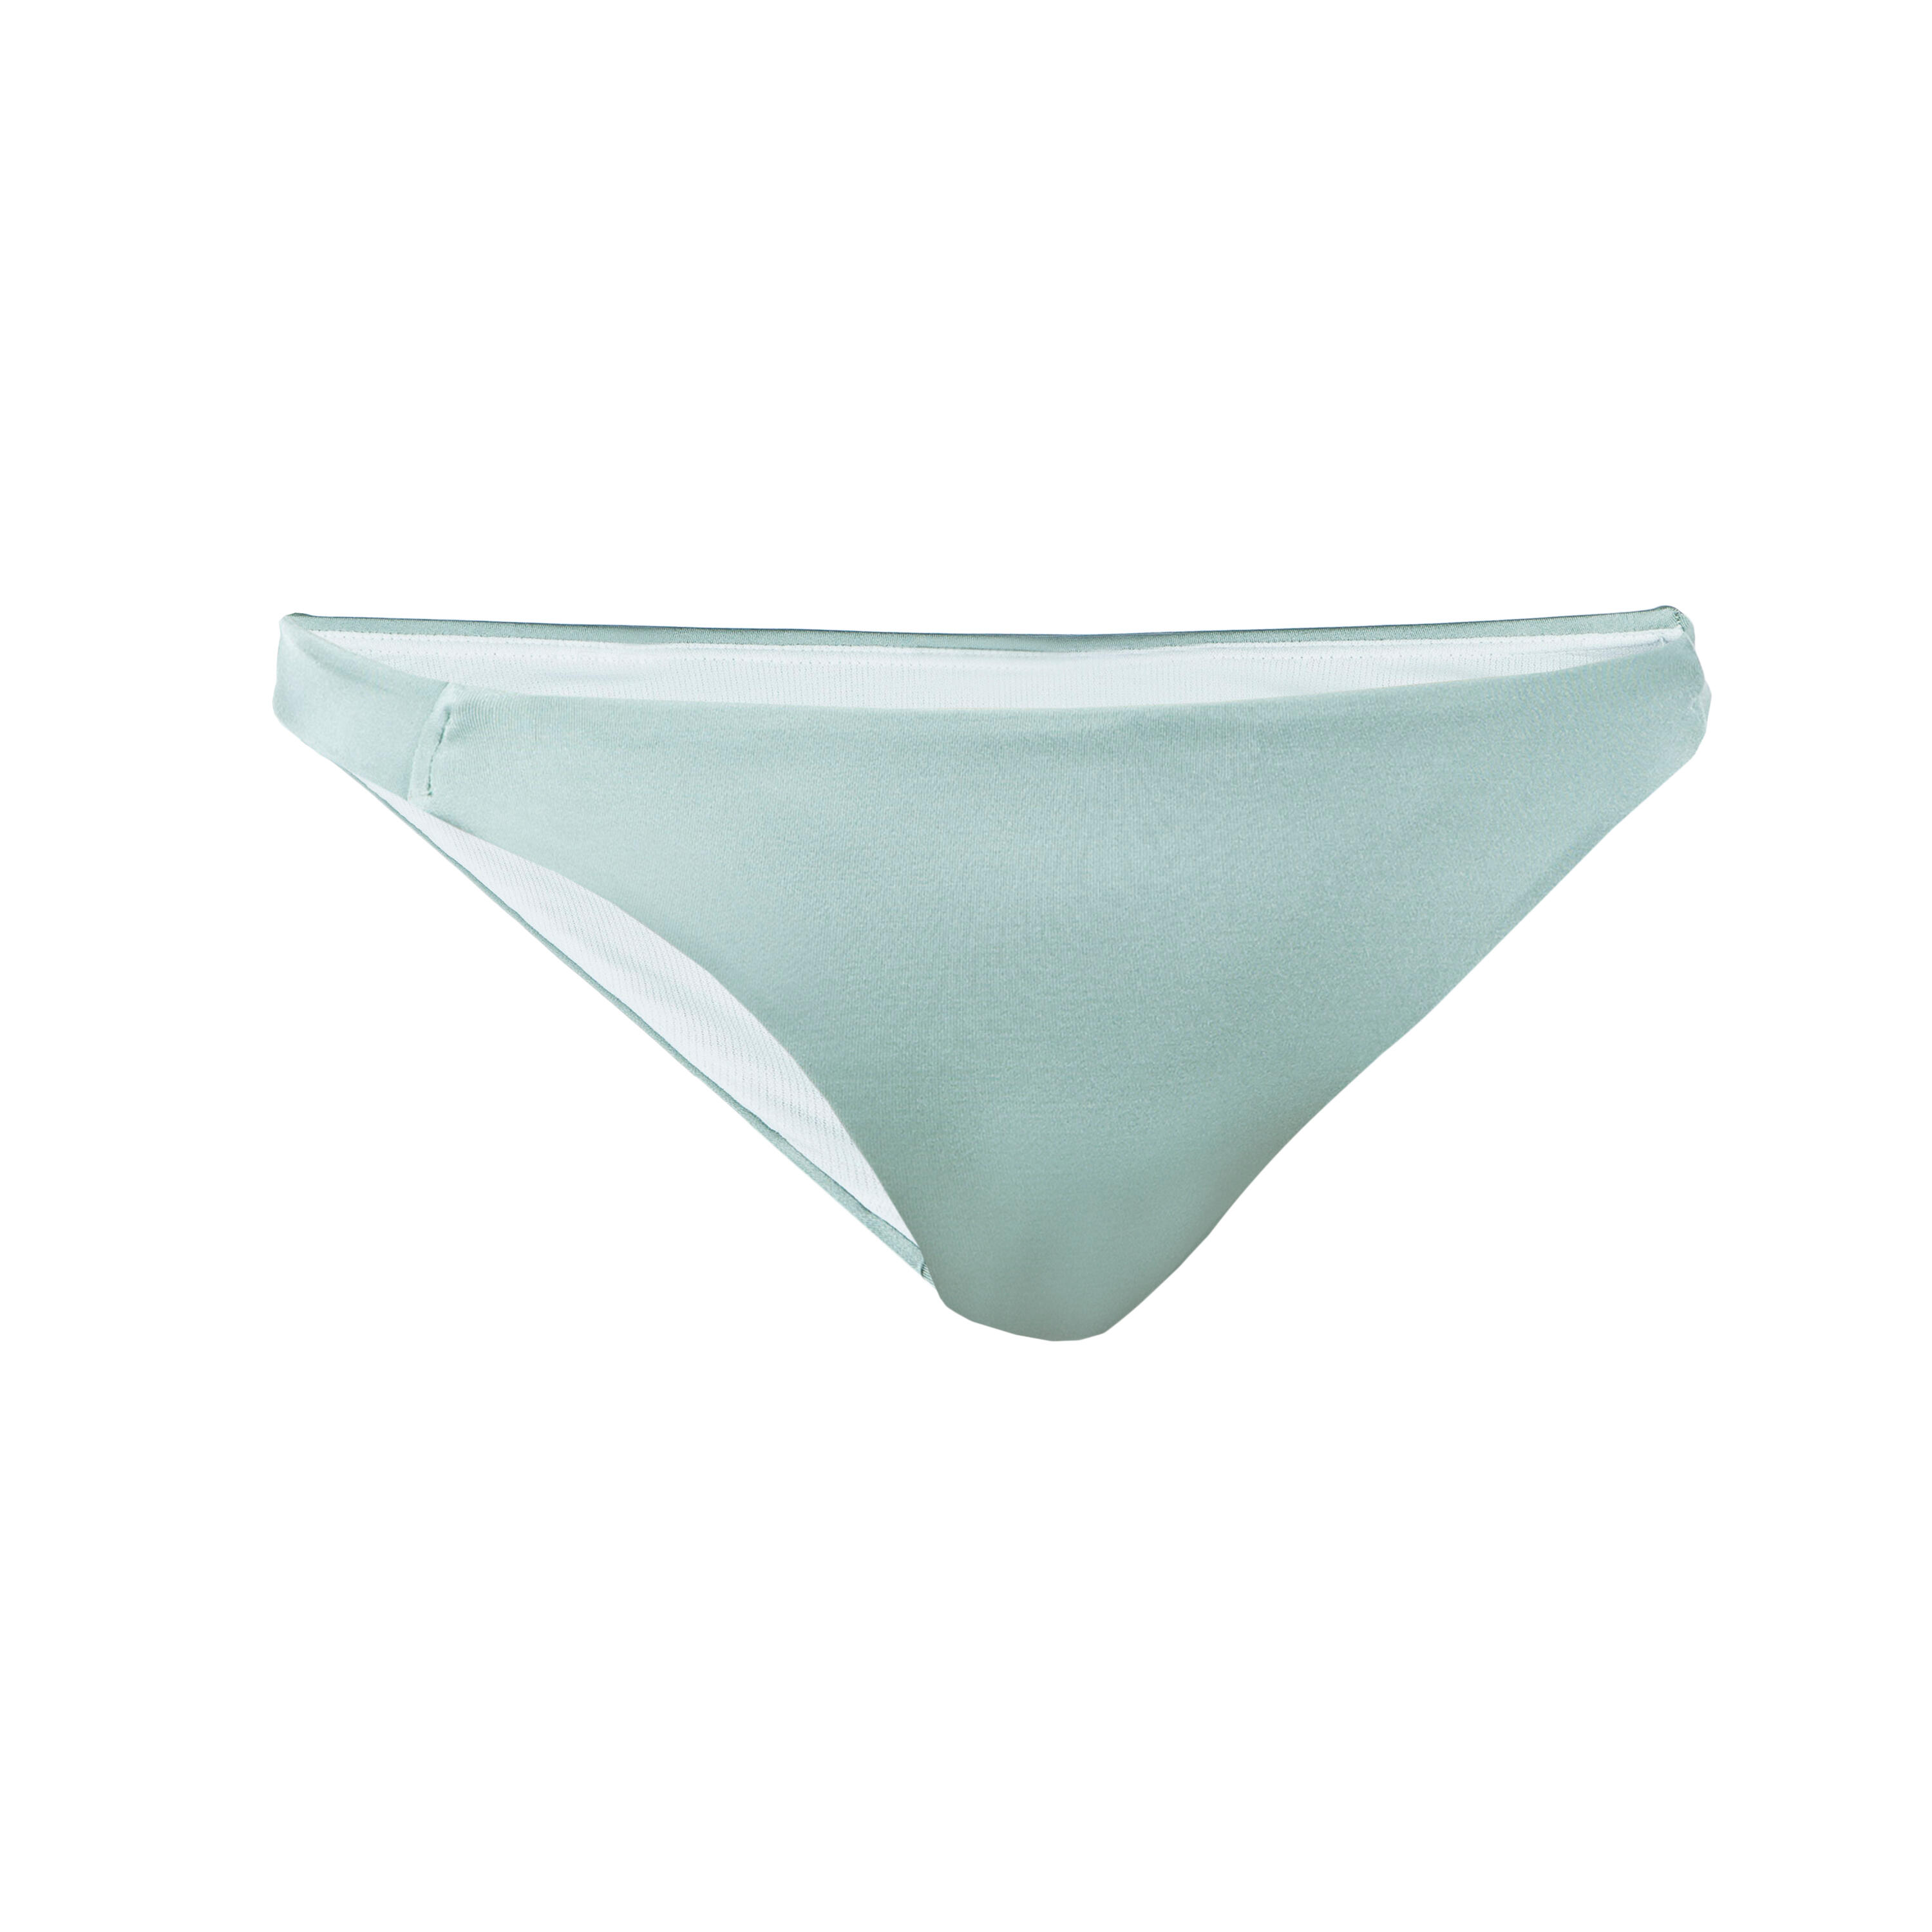 Women's Classic Swimsuit Bottoms with Thin Edges ALY - LIGHT GREEN 3/10